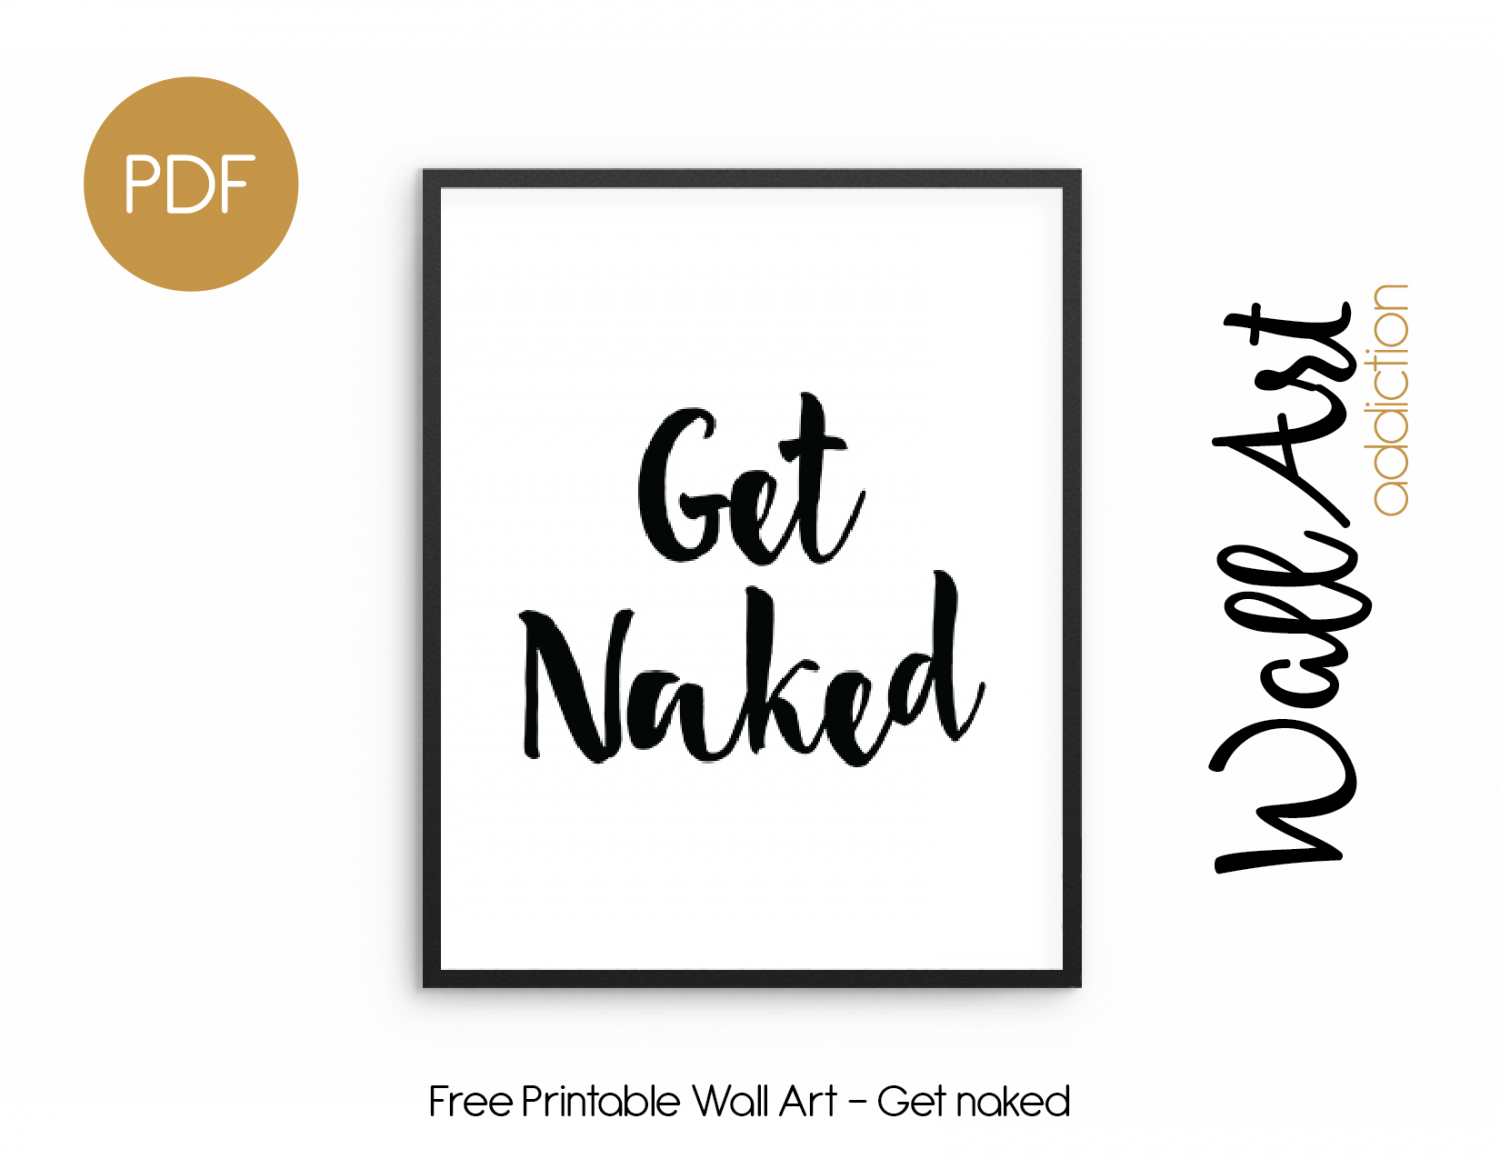 Free Printable Wall Art - Get Naked | For The Home In 2019 - Relax Soak Unwind Free Printable